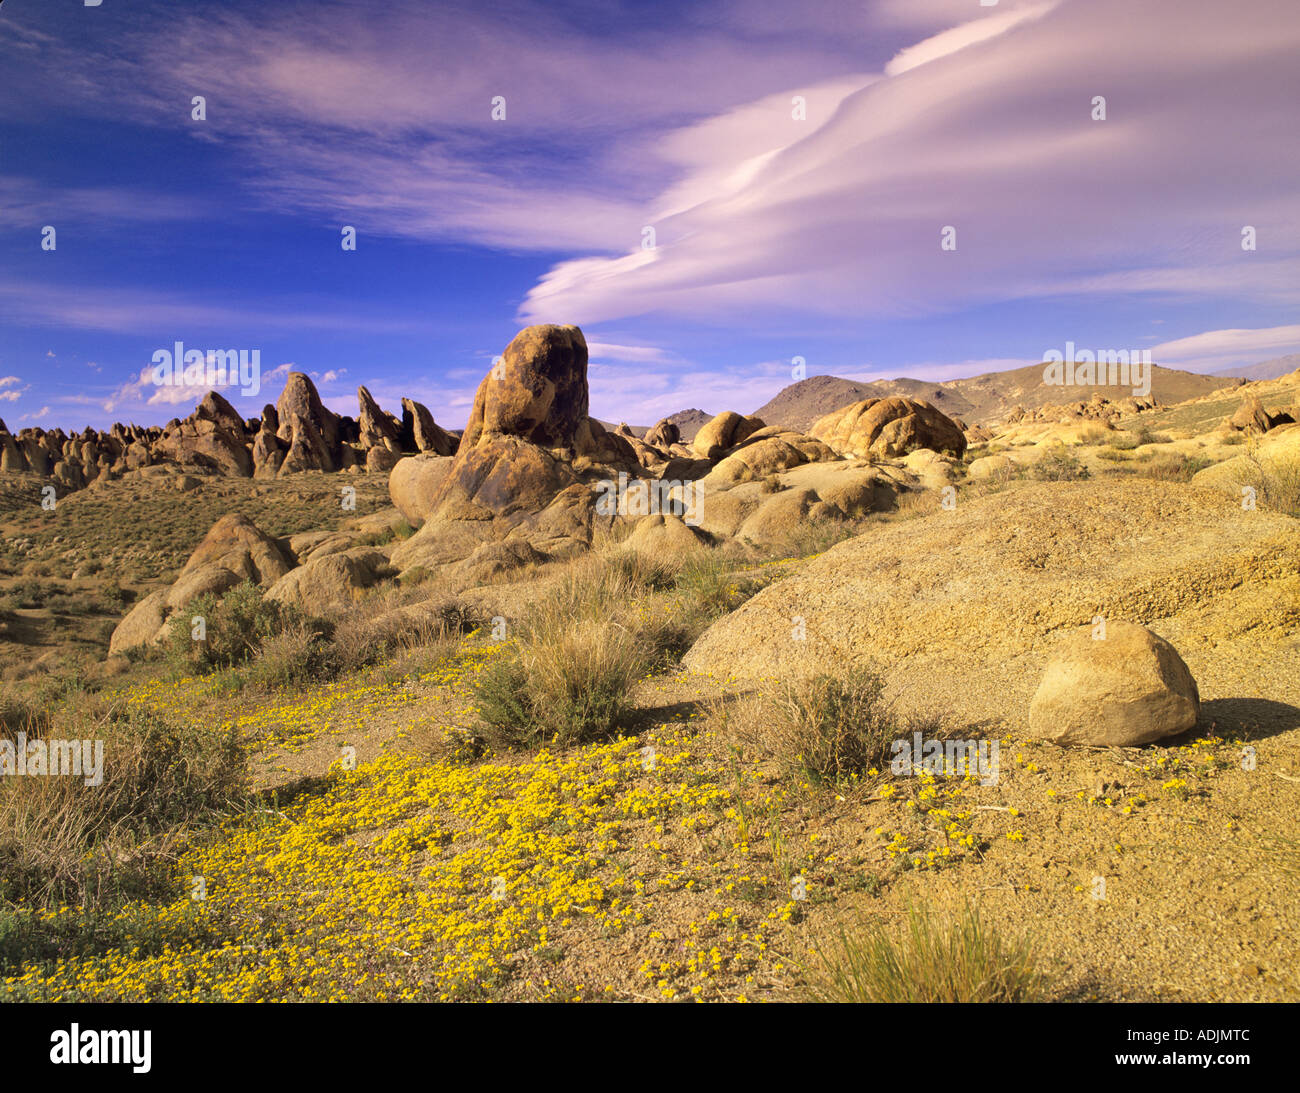 Yellow flowers and lenticular clouds in Alabama Hills California Stock Photo